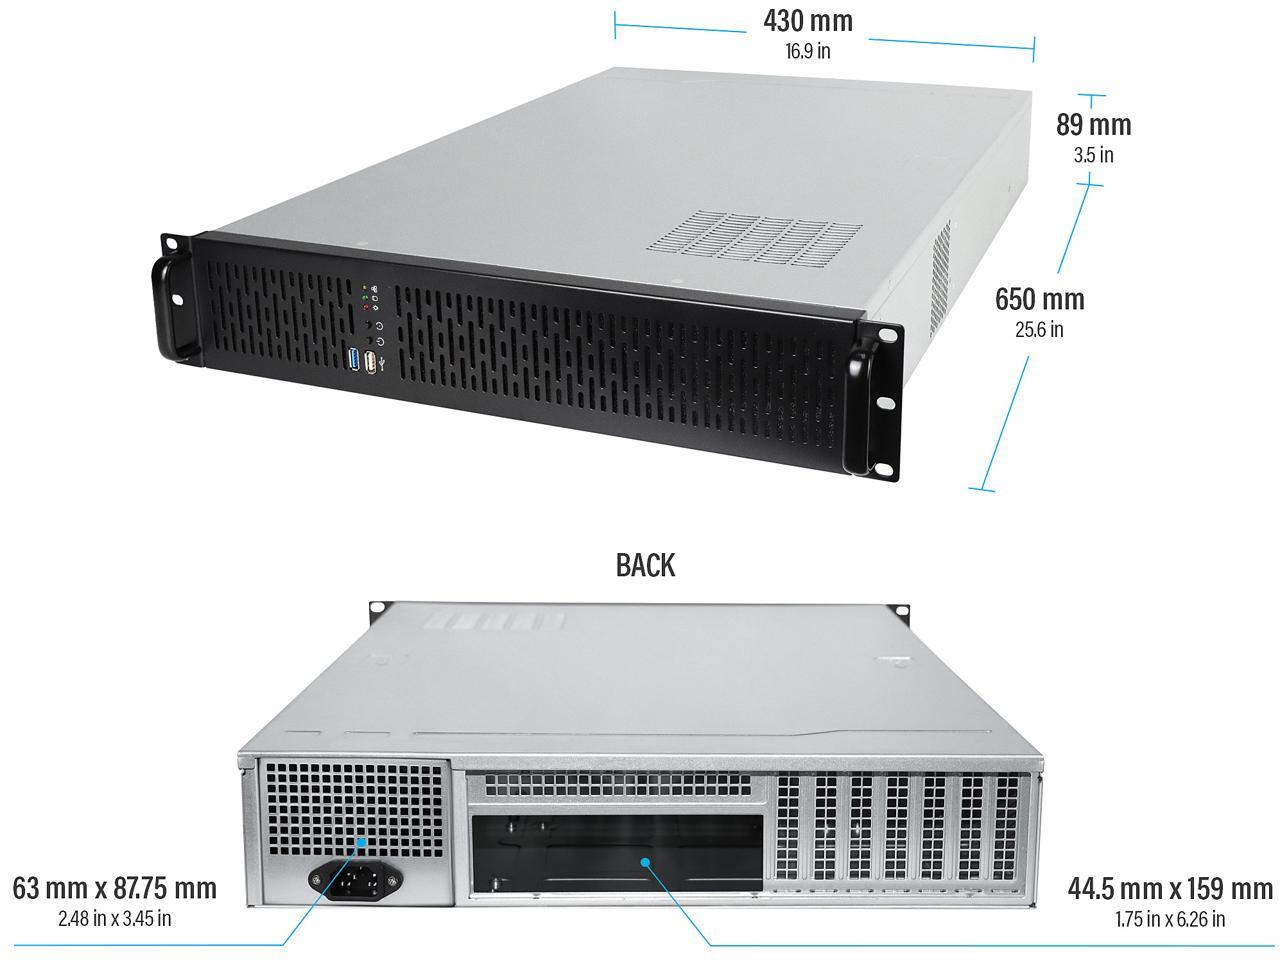 Rosewill RSV-Z2900U 2U Server Chassis Rackmount Case, 4x 3.5" Bays, 2x 2.5" Devices, E-ATX Compatible, 3x 80mm Fans, 1x USB 3.0,